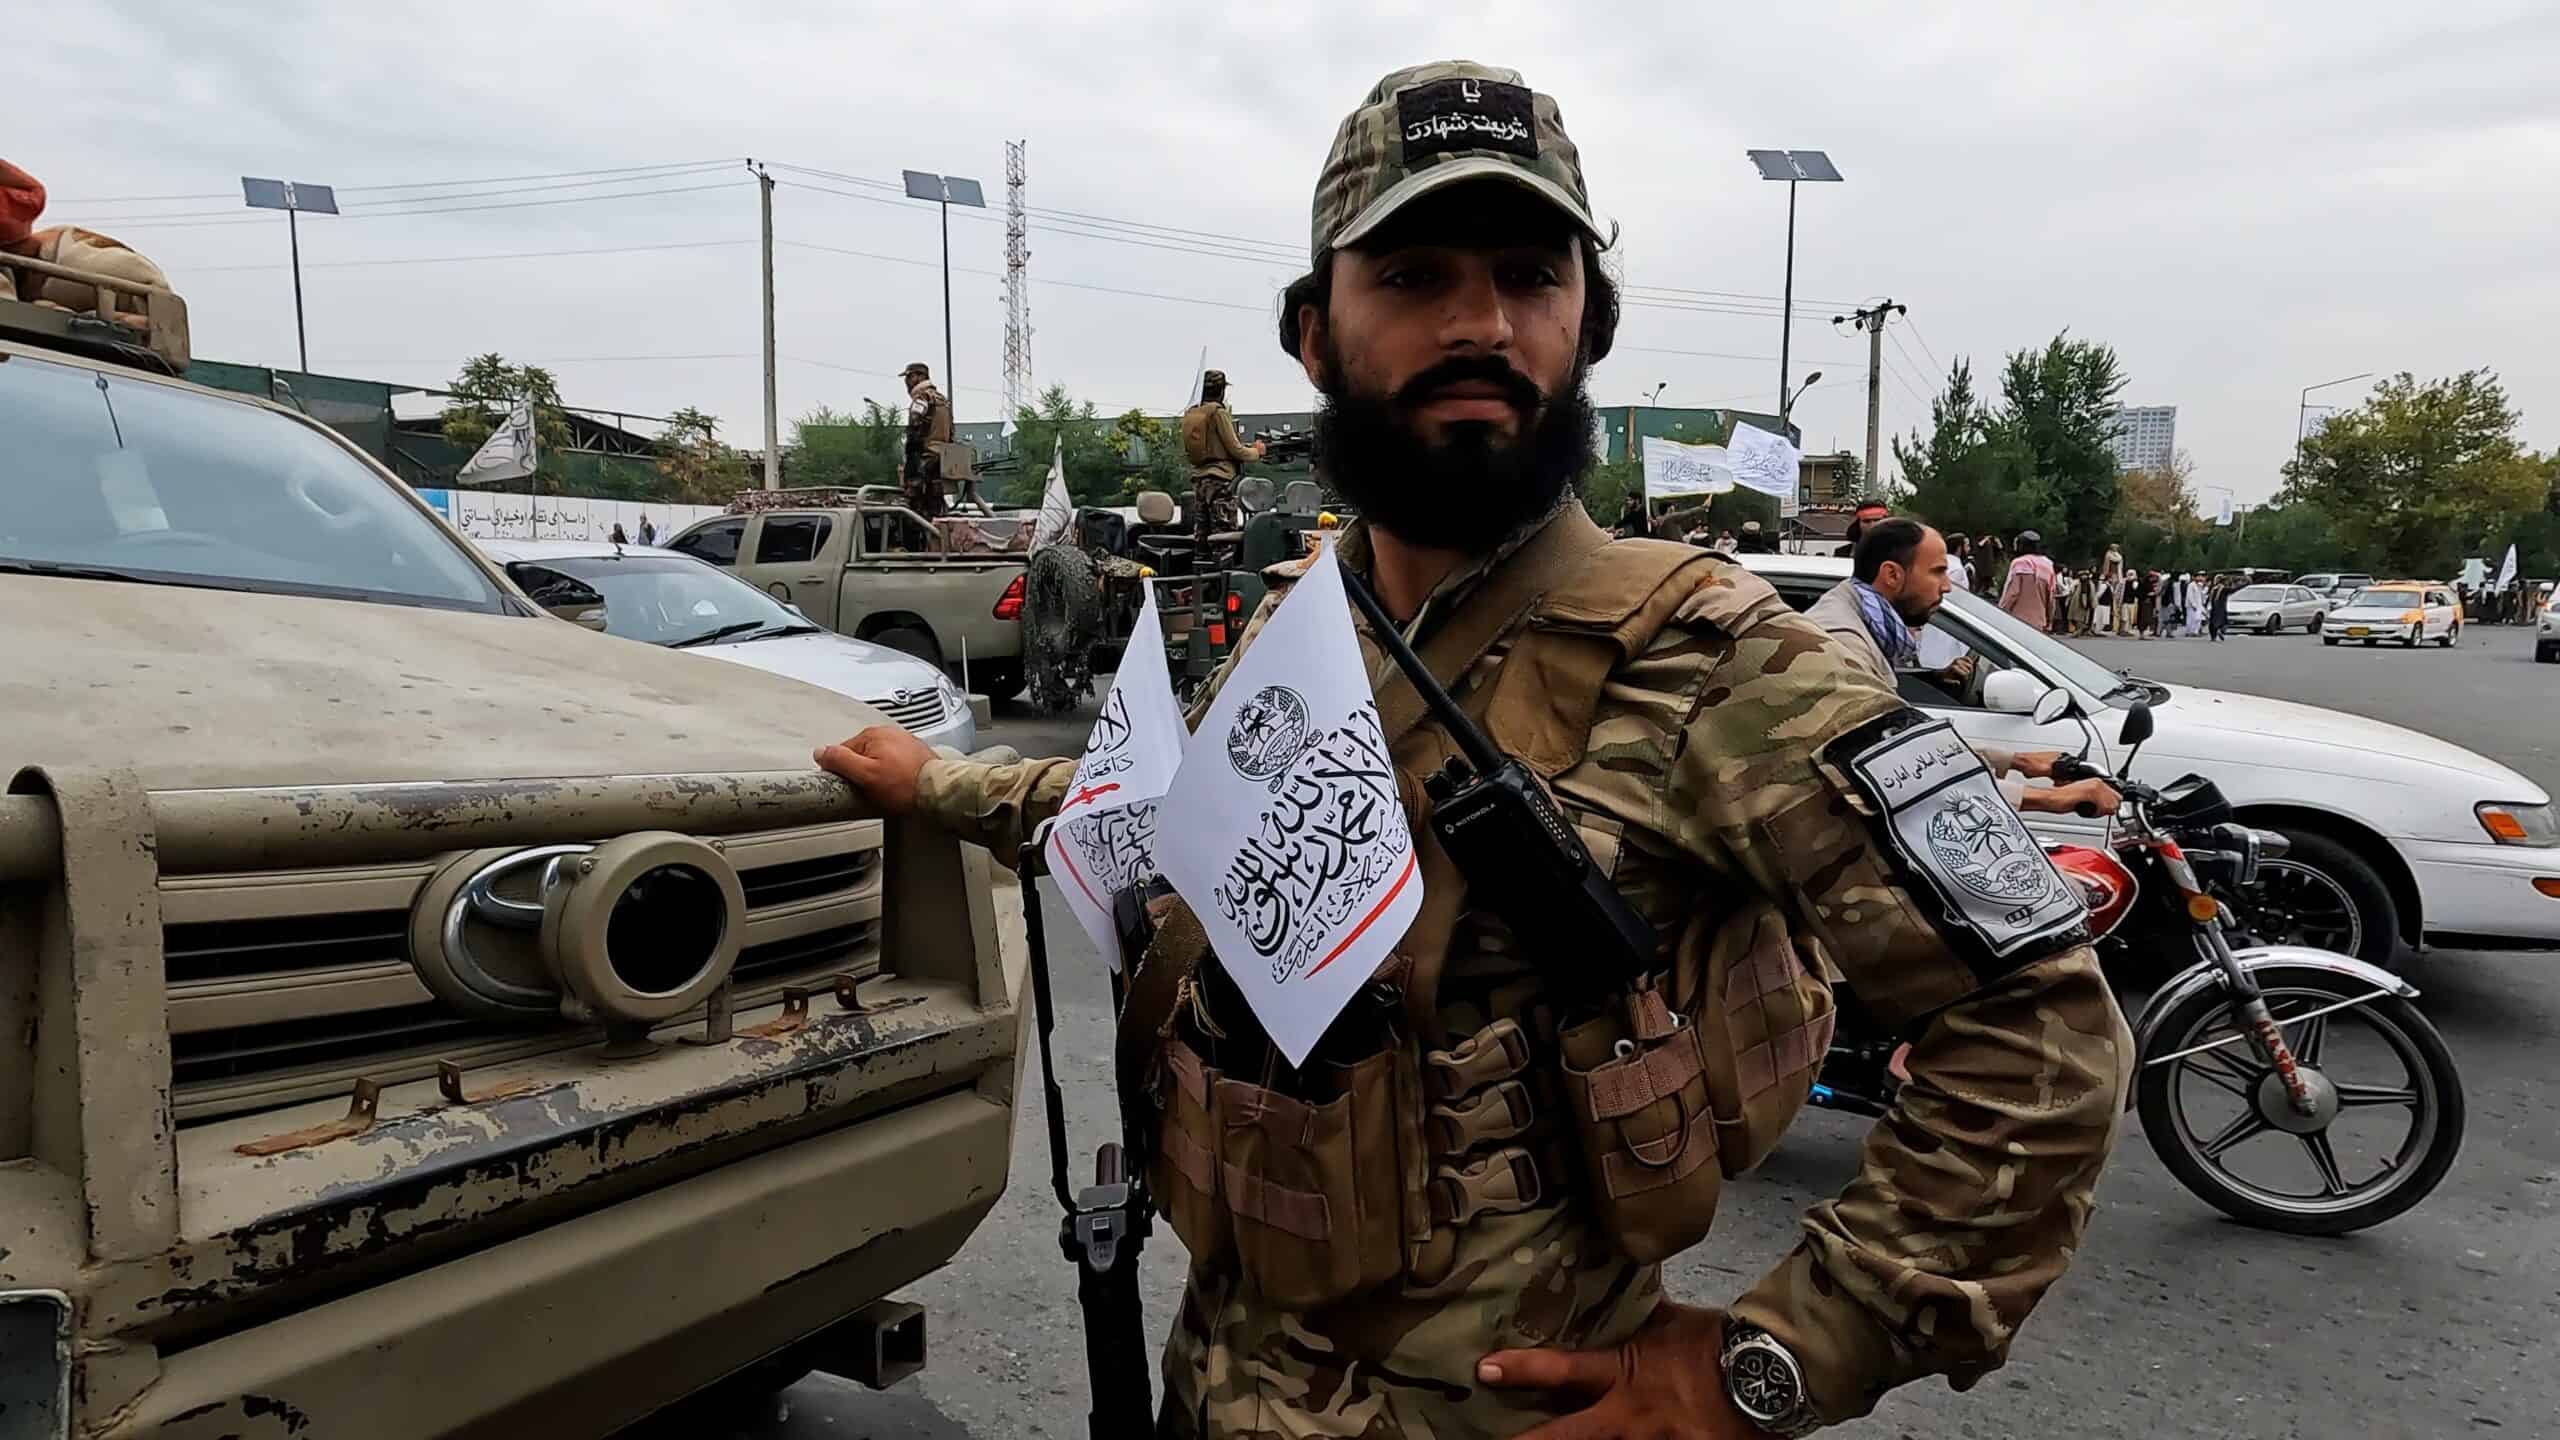 Taliban member with chest flags